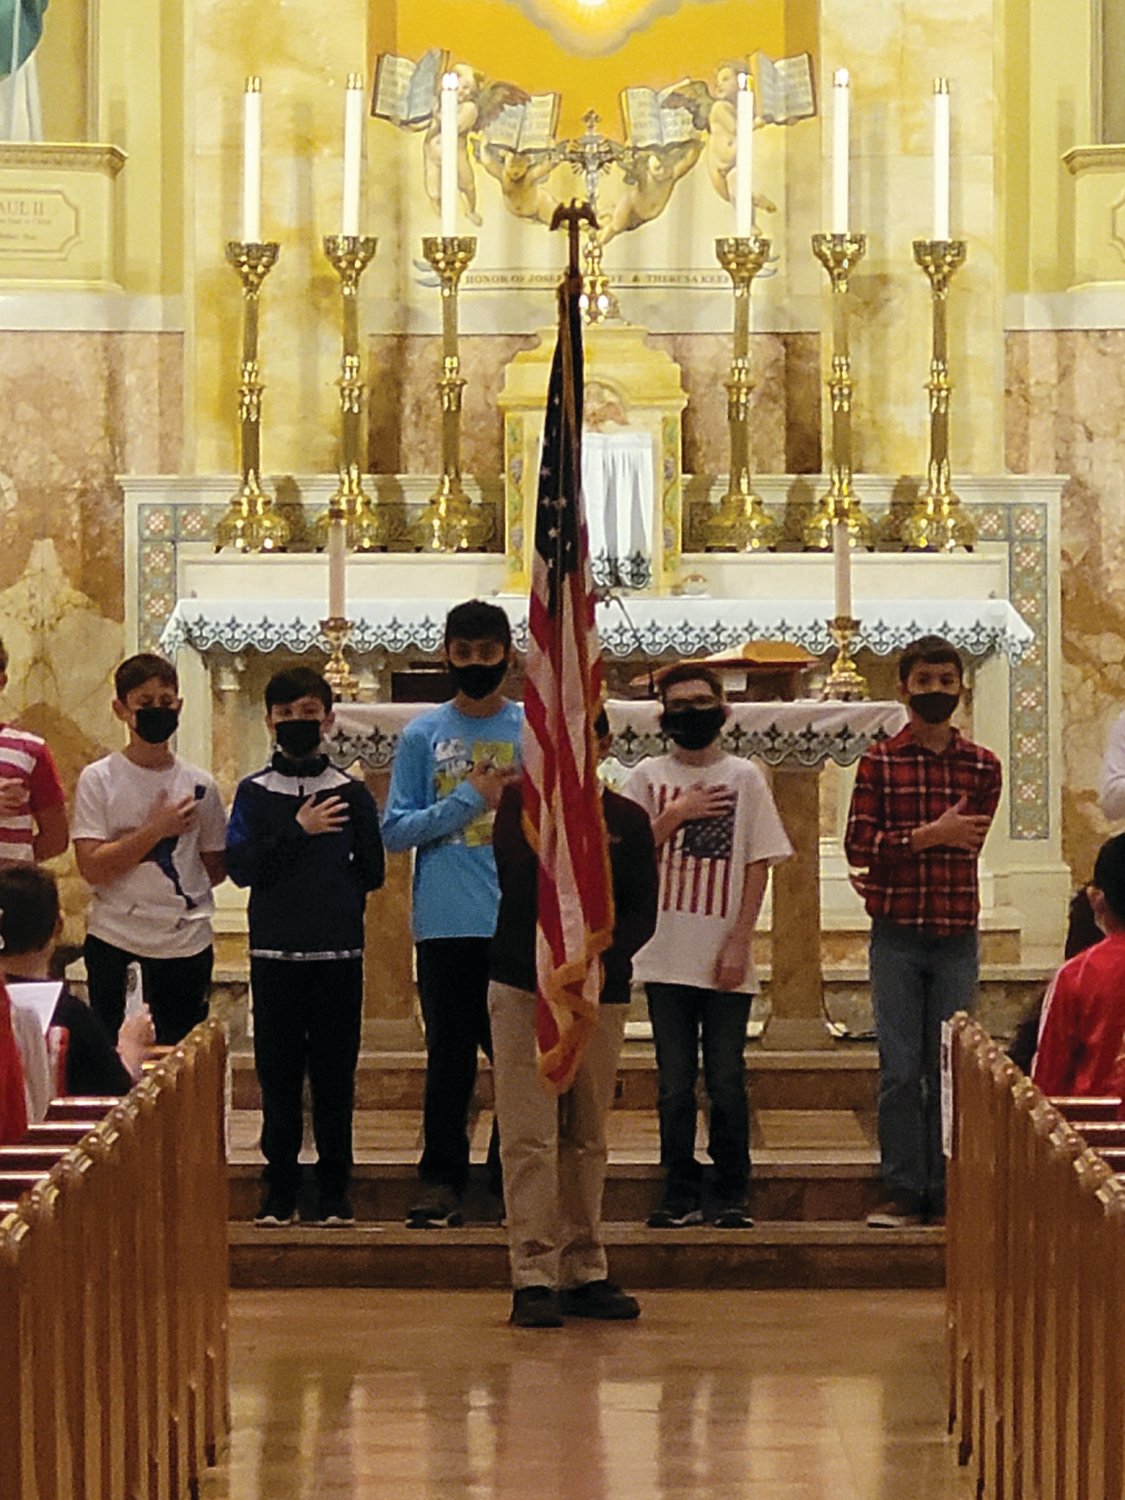 St. Rocco School in Johnston held a prayer service for veterans on Wednesday morning at St. Rocco Church.